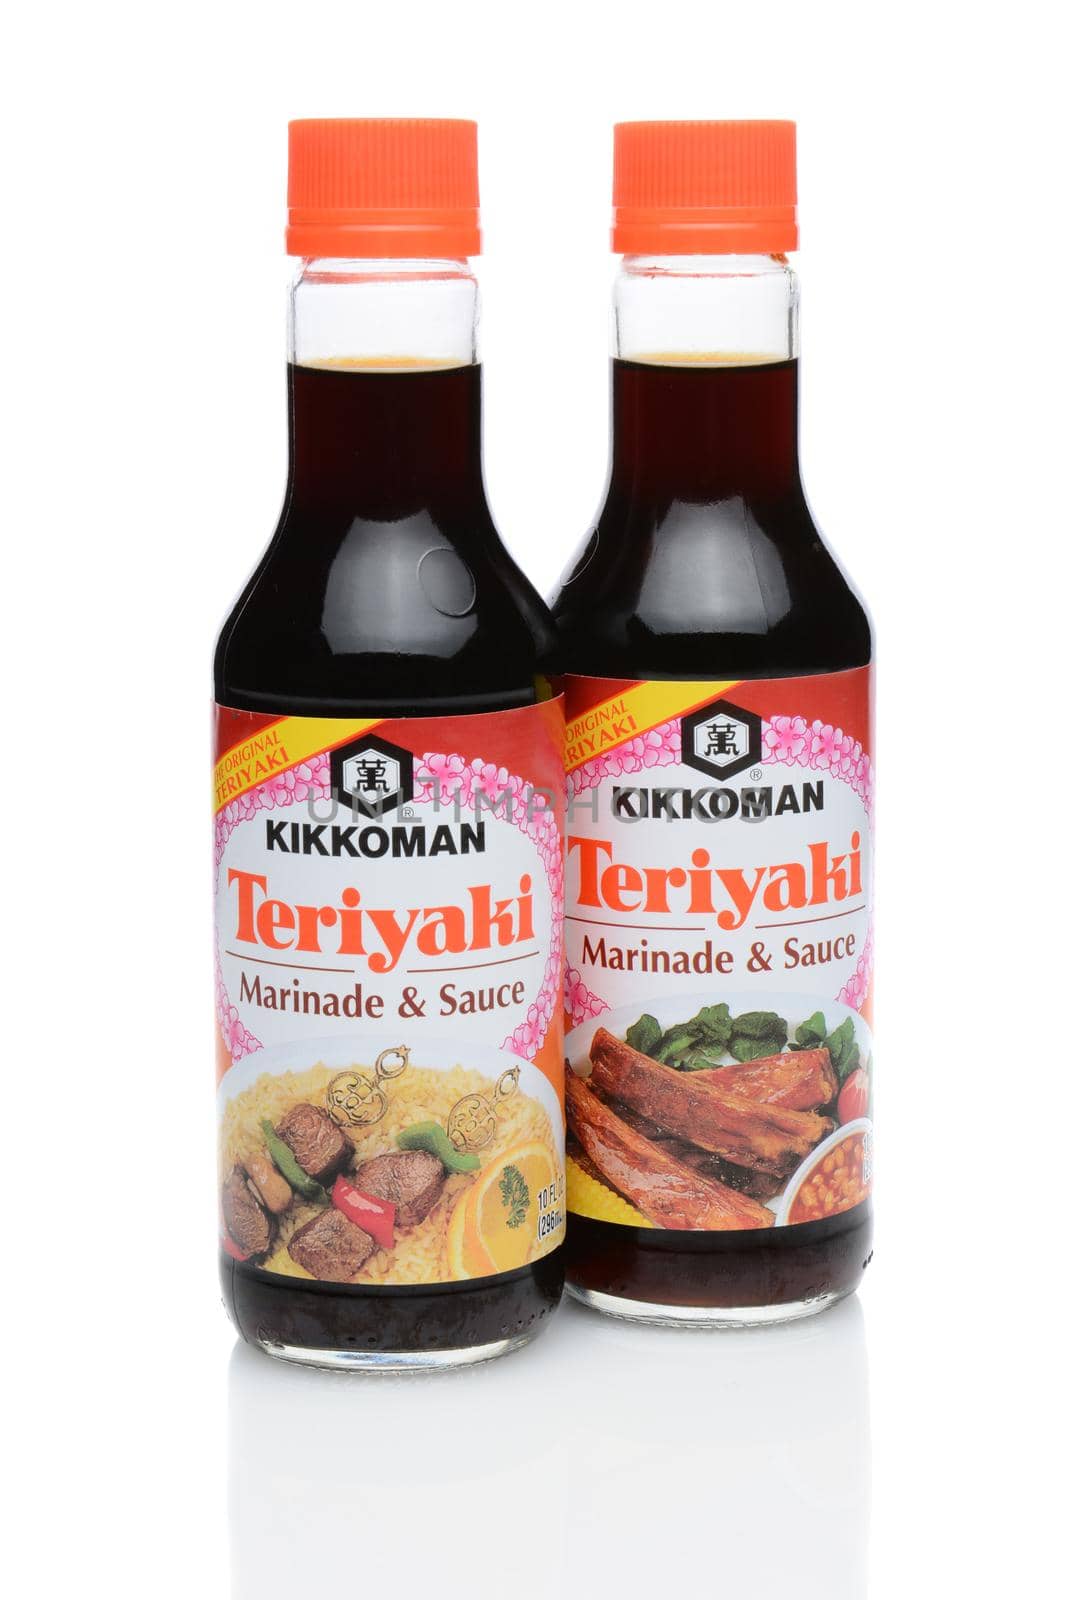 IRVINE, CA - DECEMBER 29, 2014: Two 10 ounce bottles of Kikkoman Teriyaki Marinade and Sauce. Since 1961 Kikkoman has been a leader with their teriyaki flavored blend of soy sauce and spices.